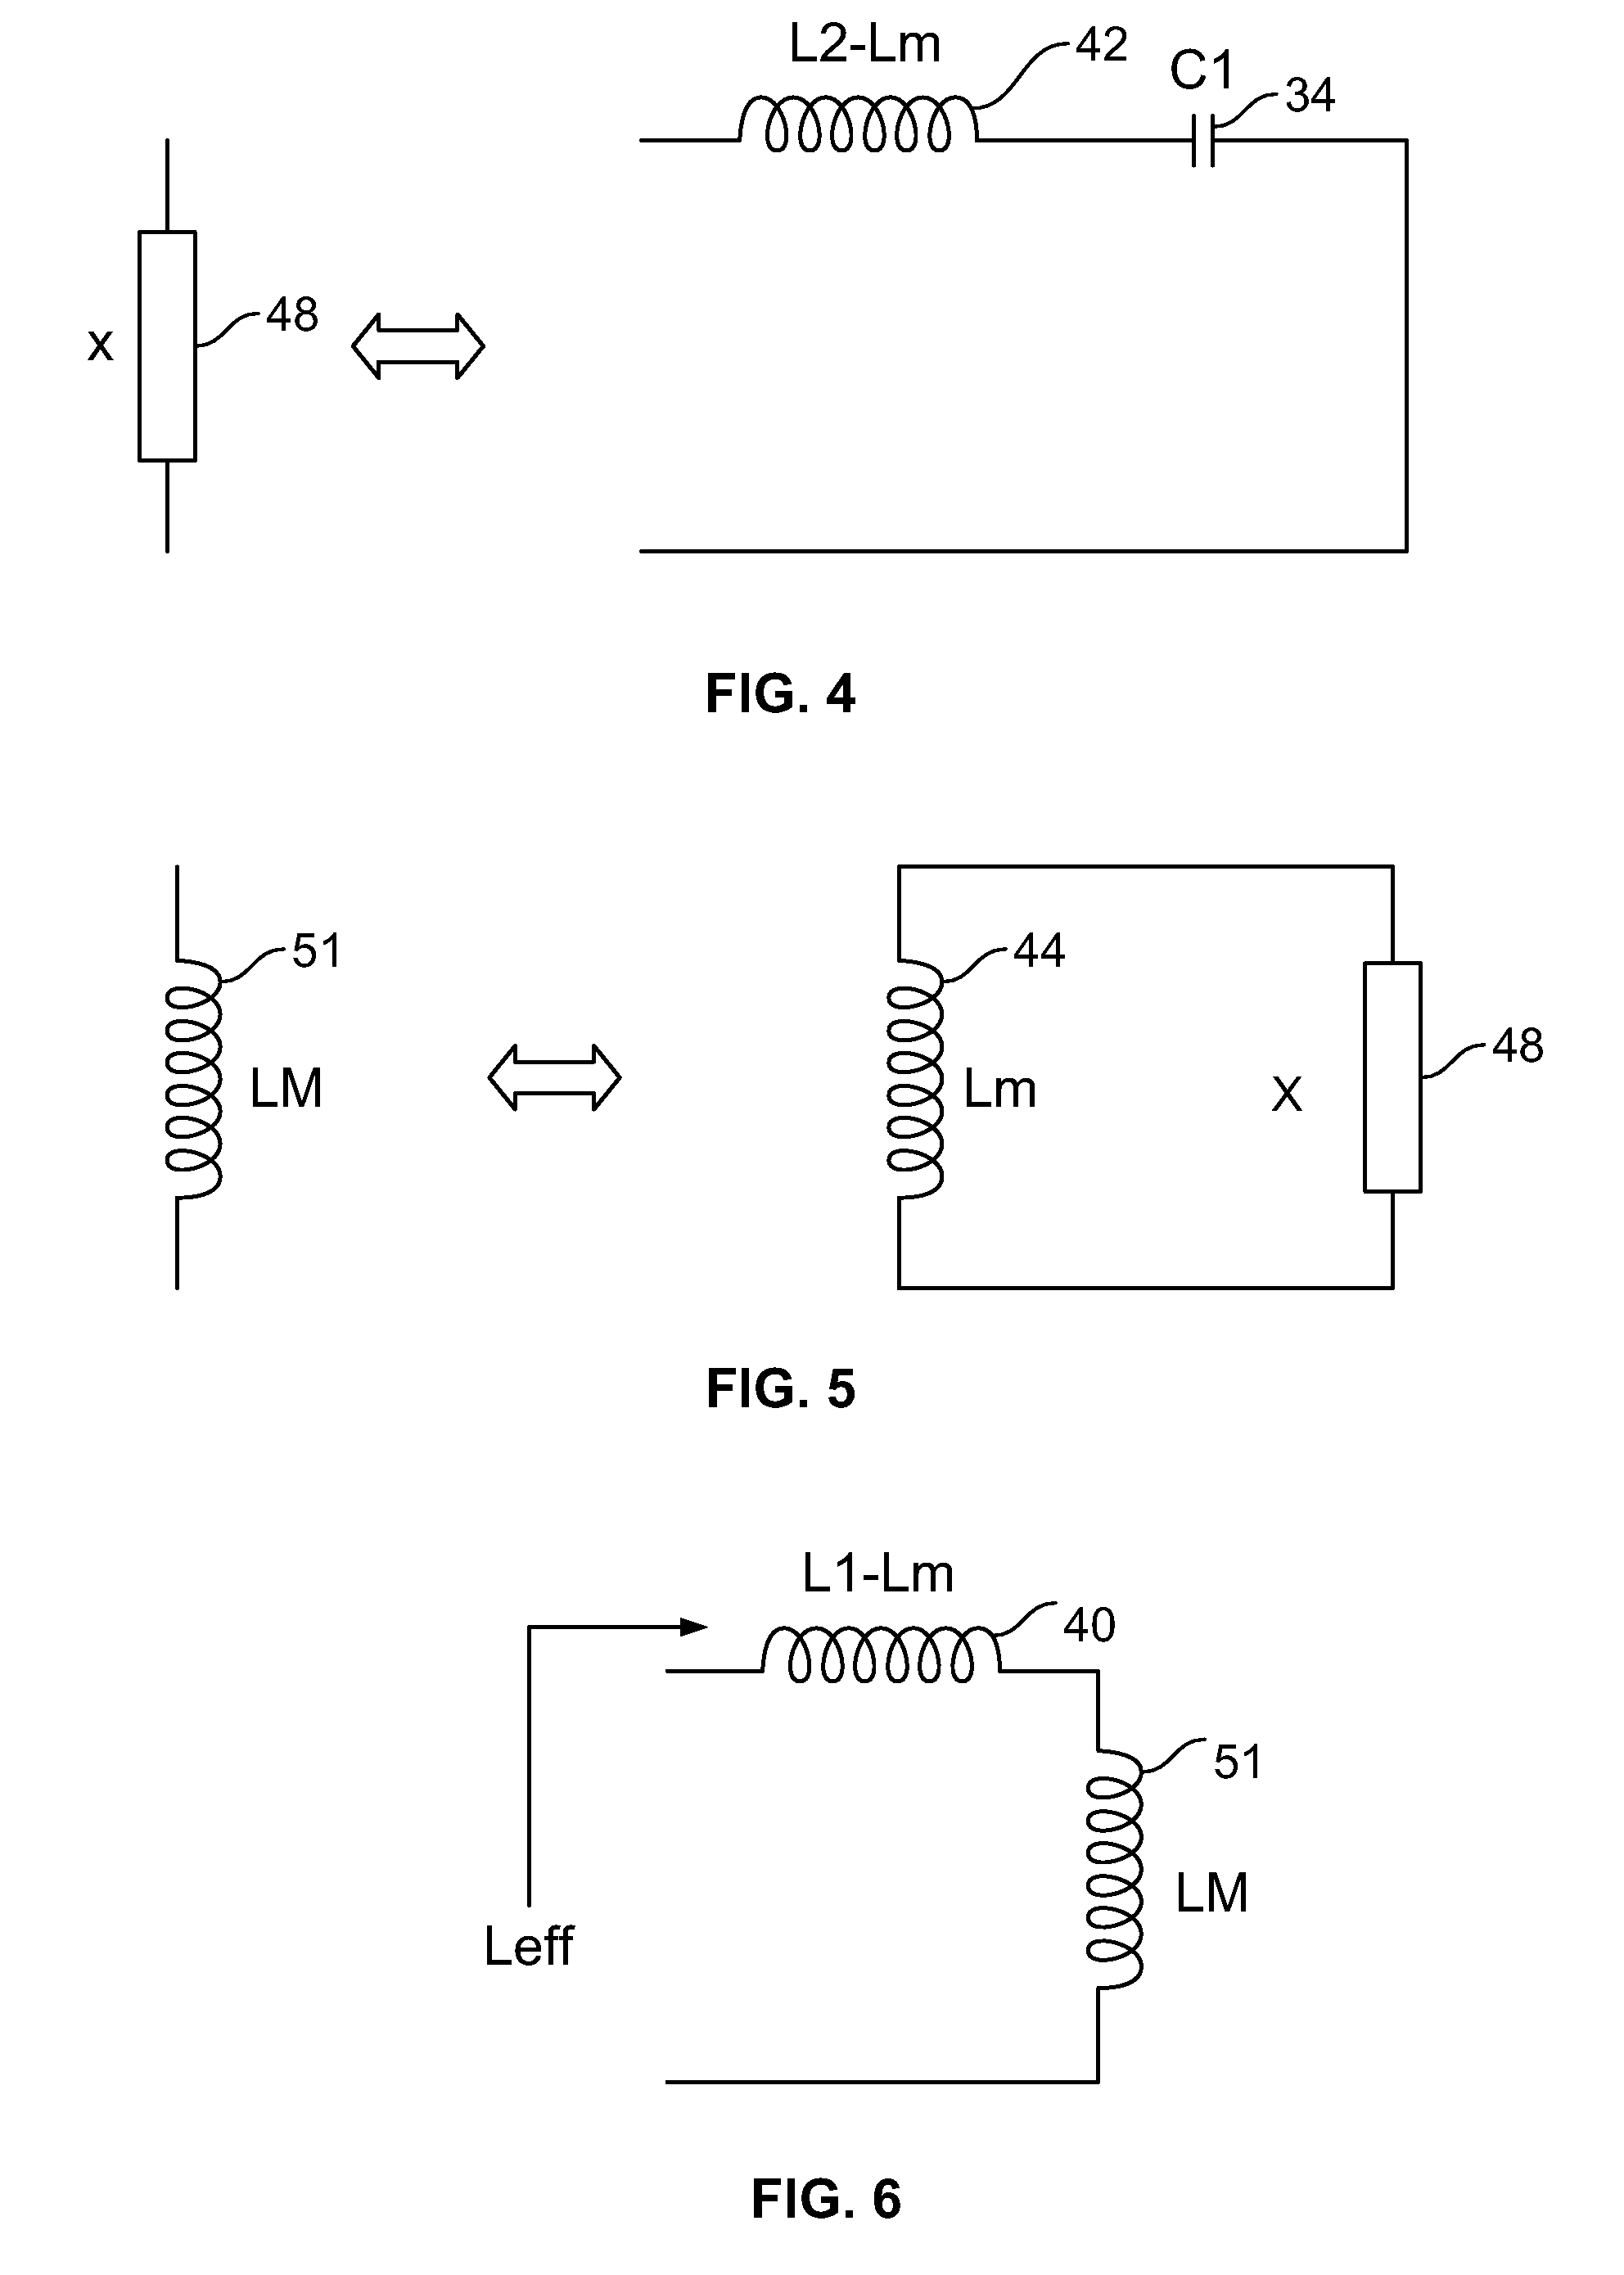 Tunable capacitively loaded transformer providing switched inductance for rf/microwave integrated circuits